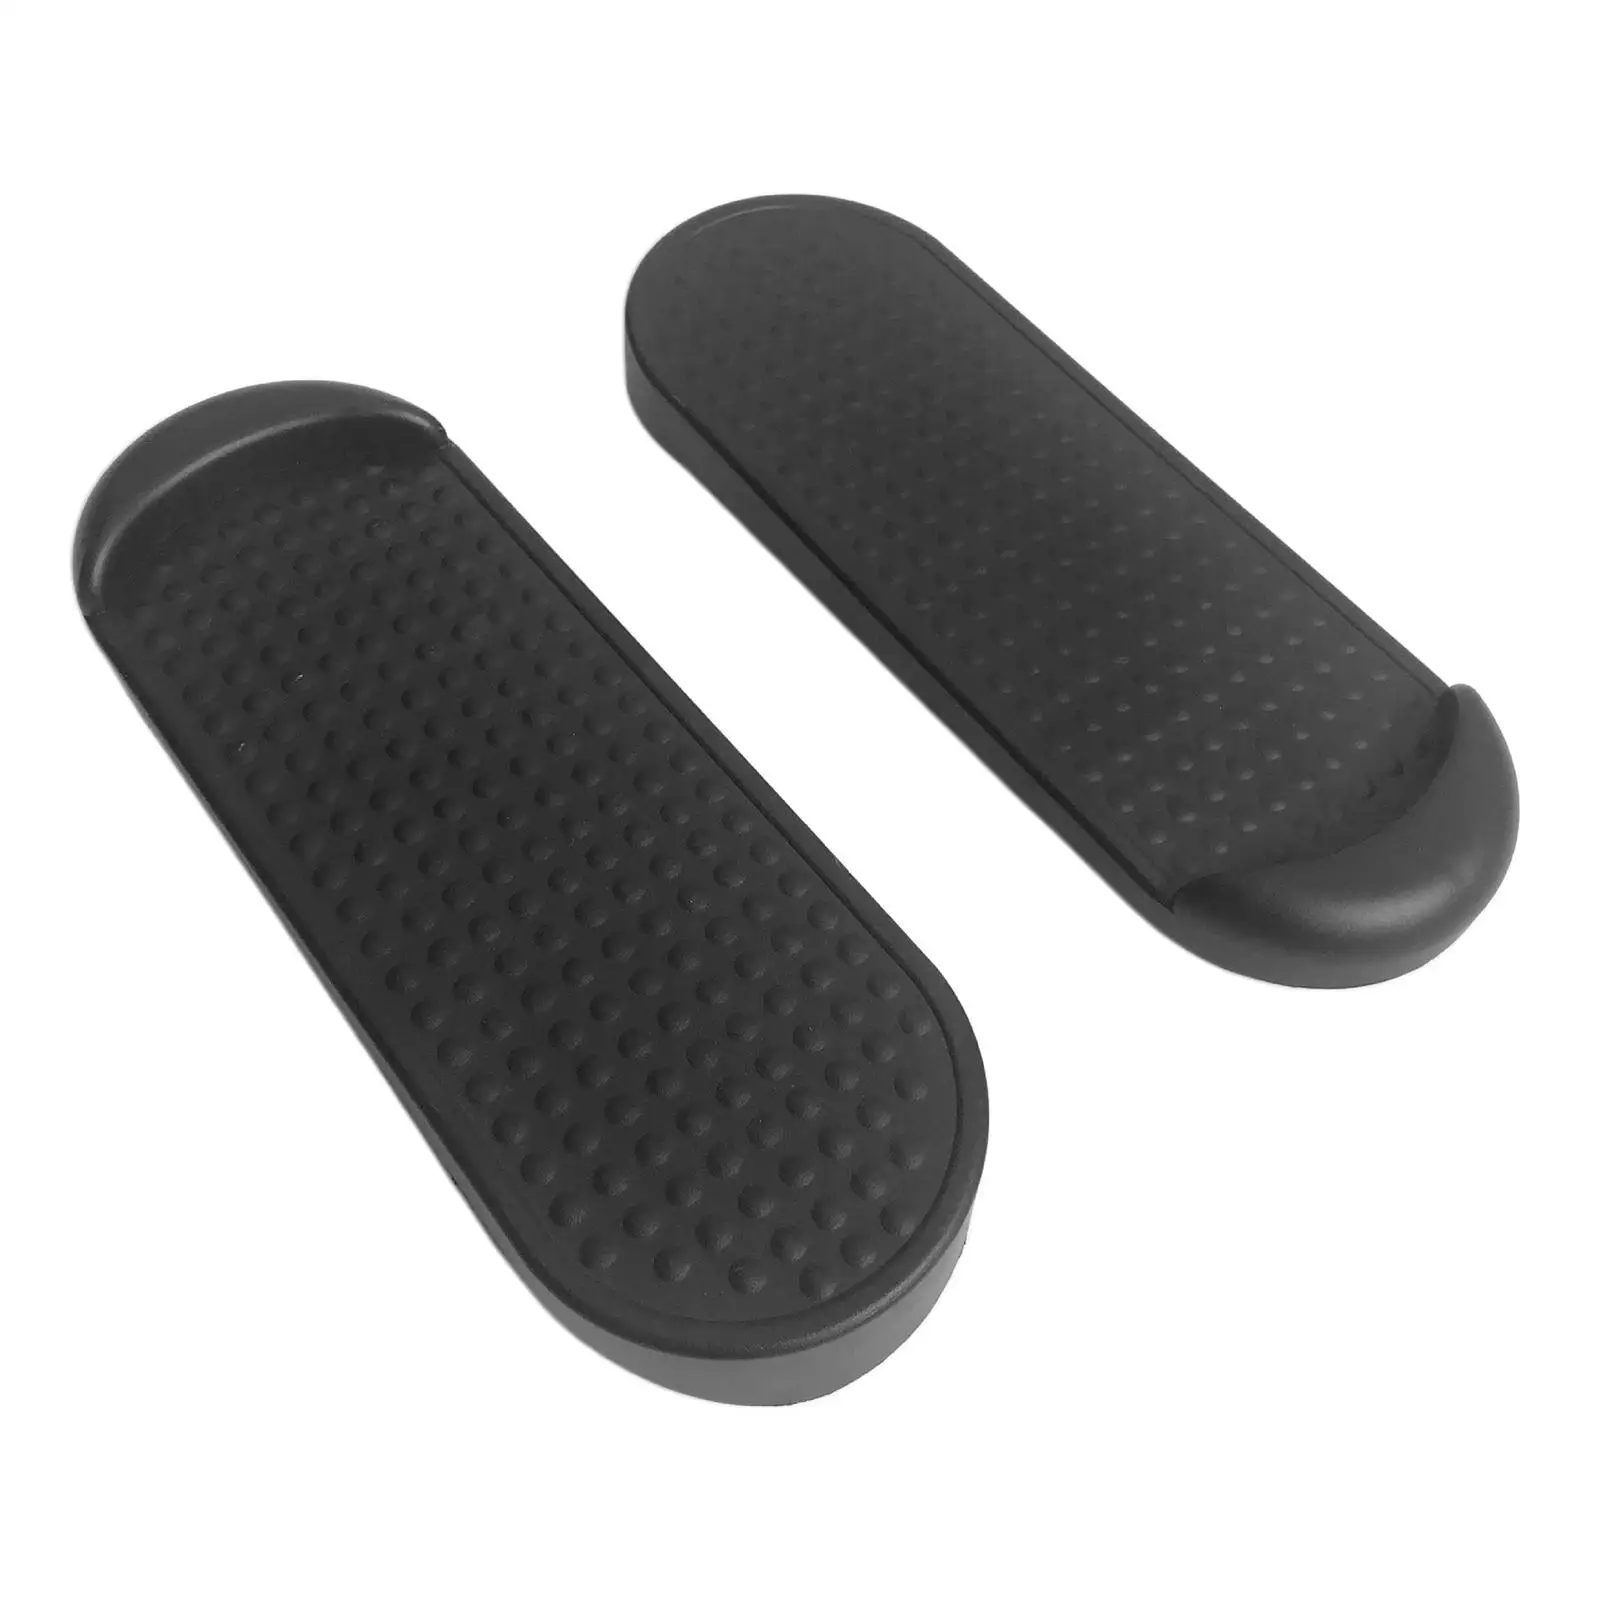 2Pcs Under Desk Elliptical Foot Pedals Seated Elliptical Nonslip Pad Stair Stepper Pedal for Climber Exercise Machine Office